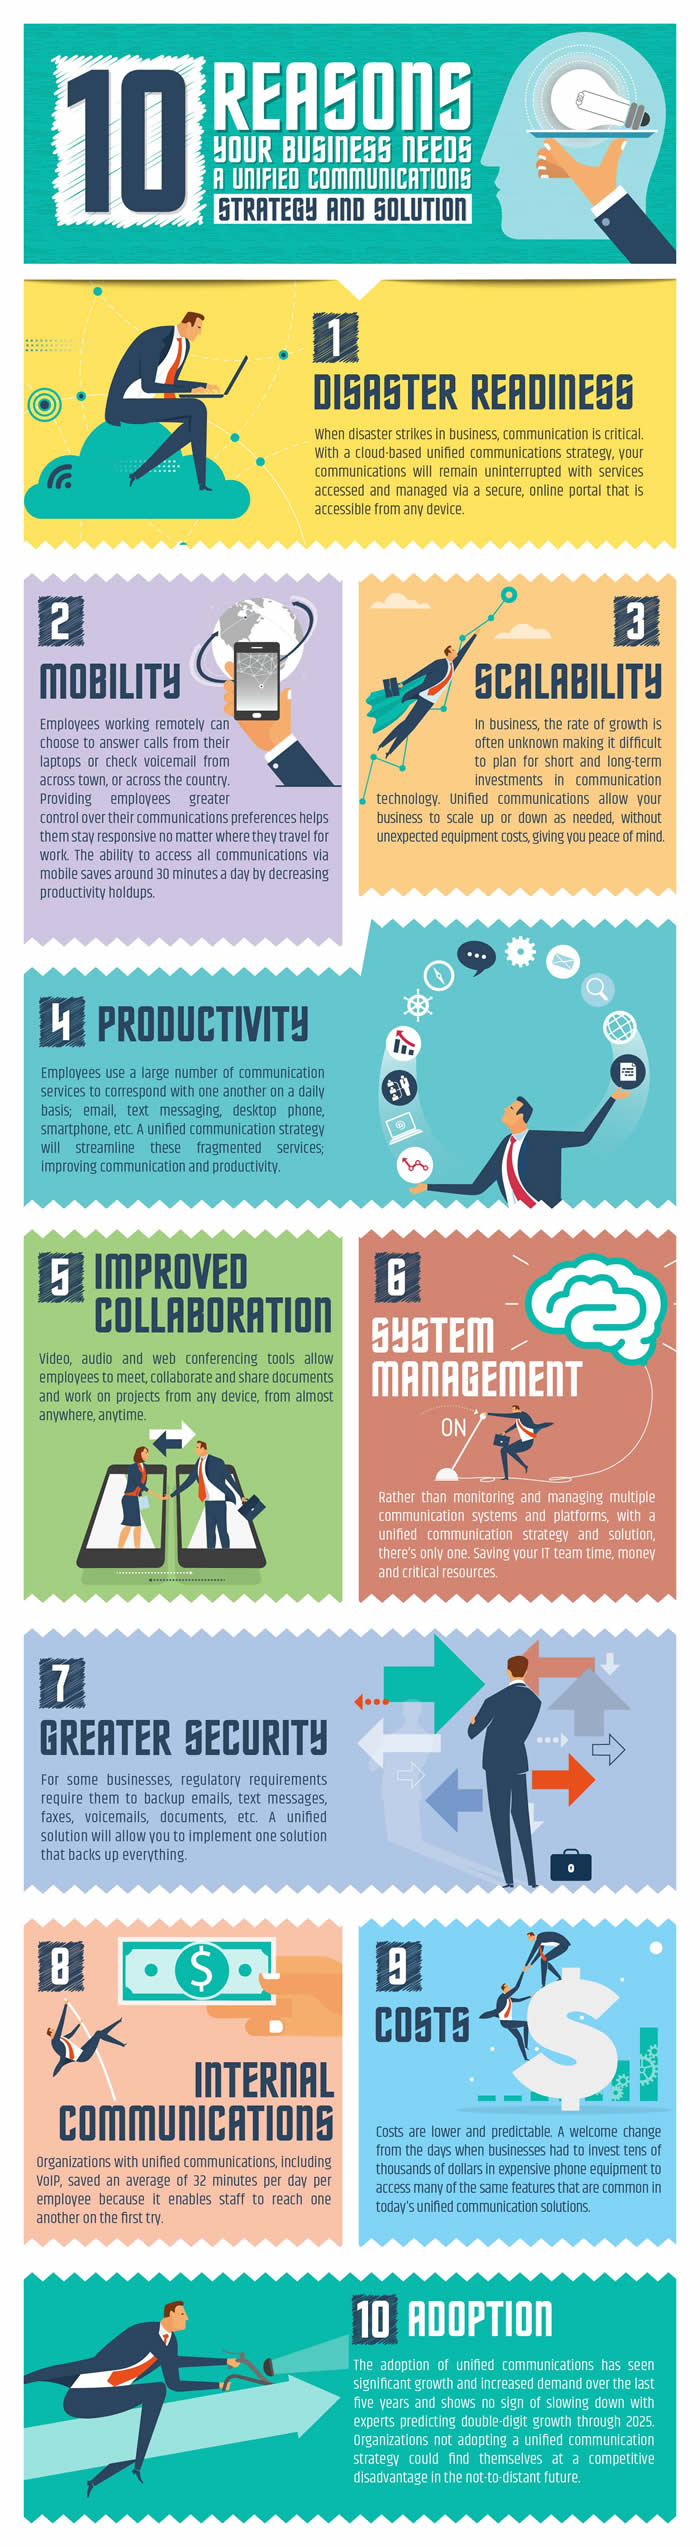 10 Reasons Your Business Needs A Unified Communications Strategy and Solution med IG.jpg